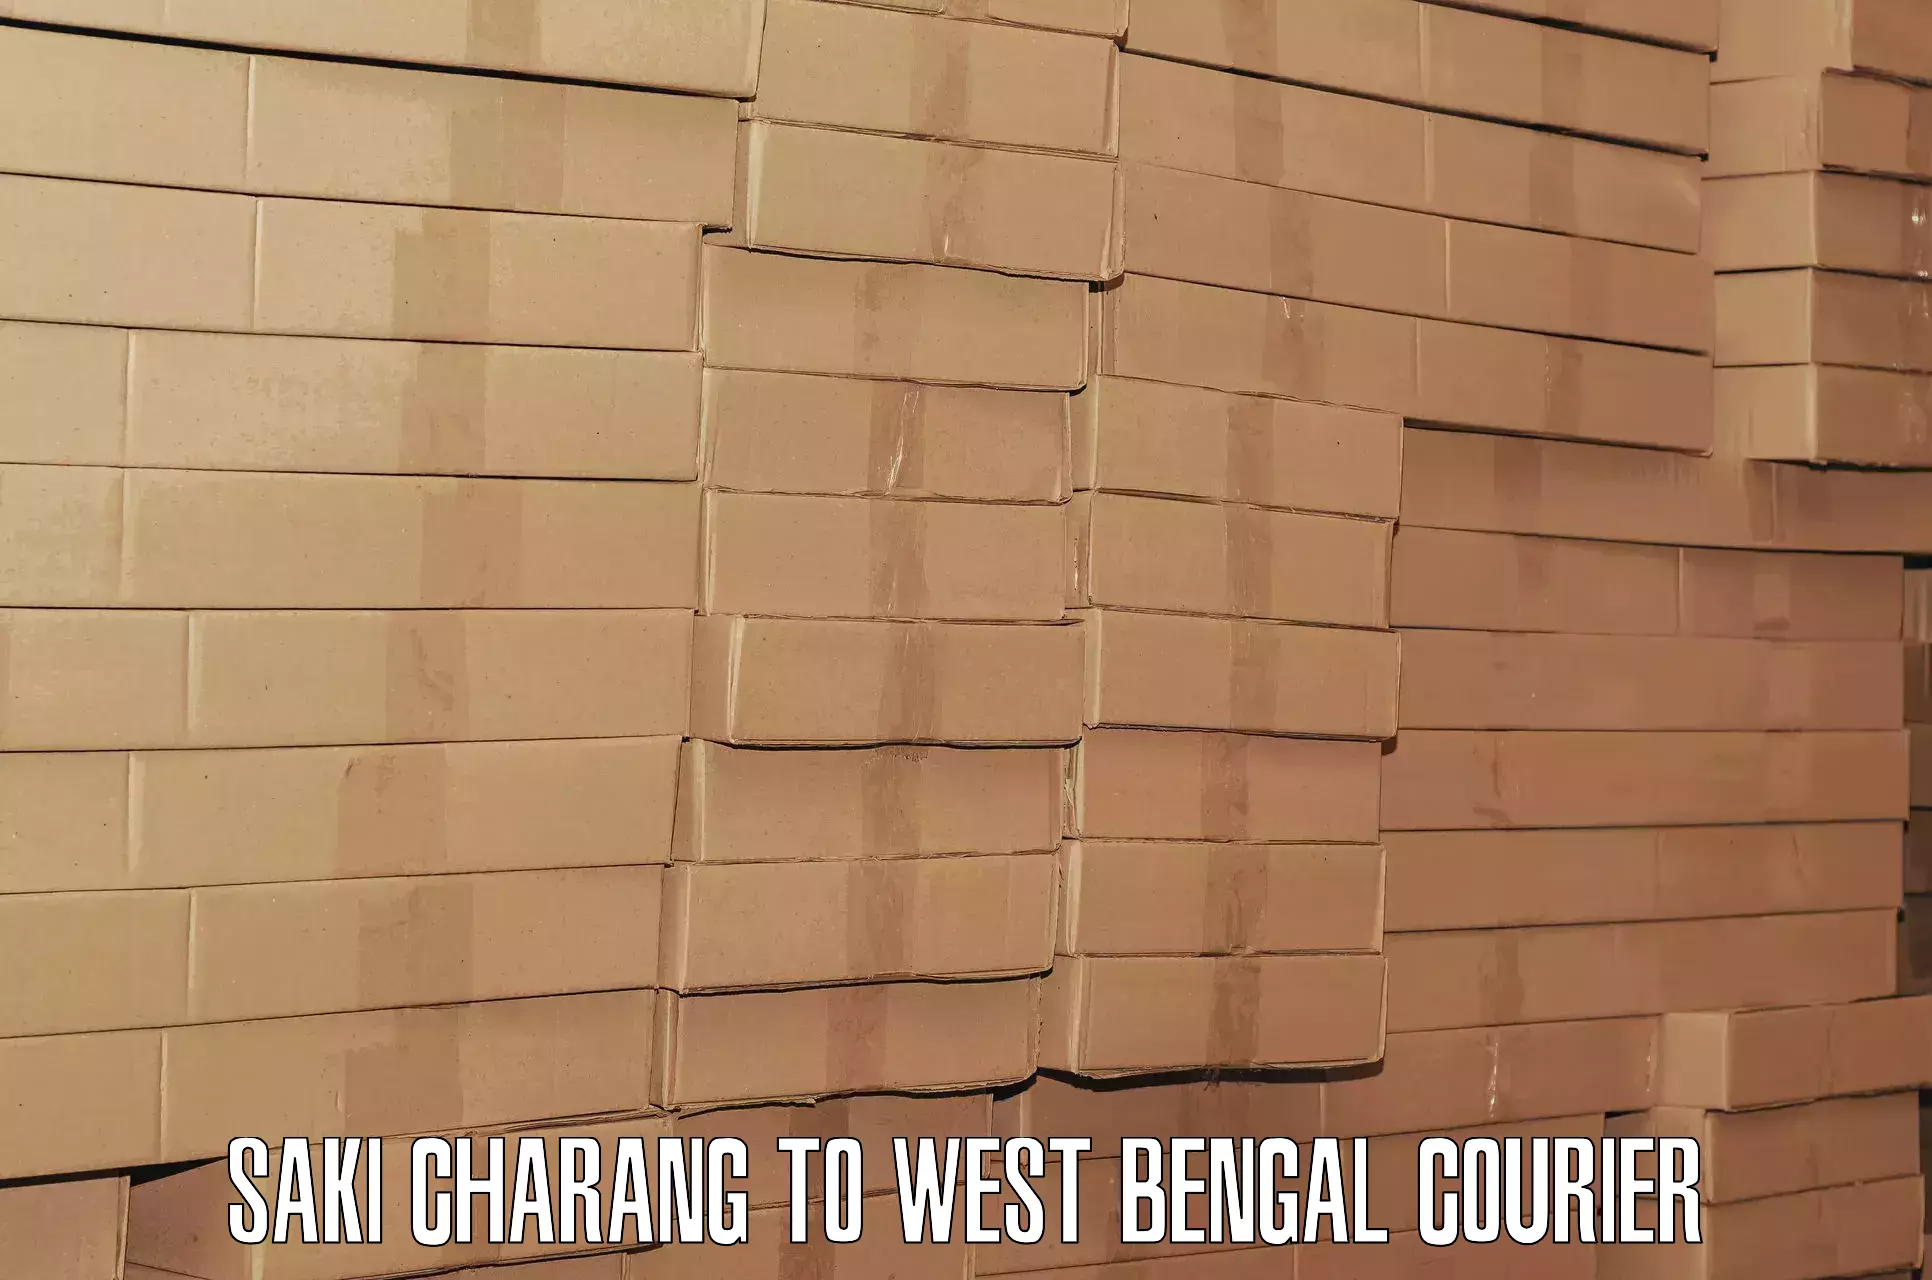 Luggage transport consulting Saki Charang to West Bengal